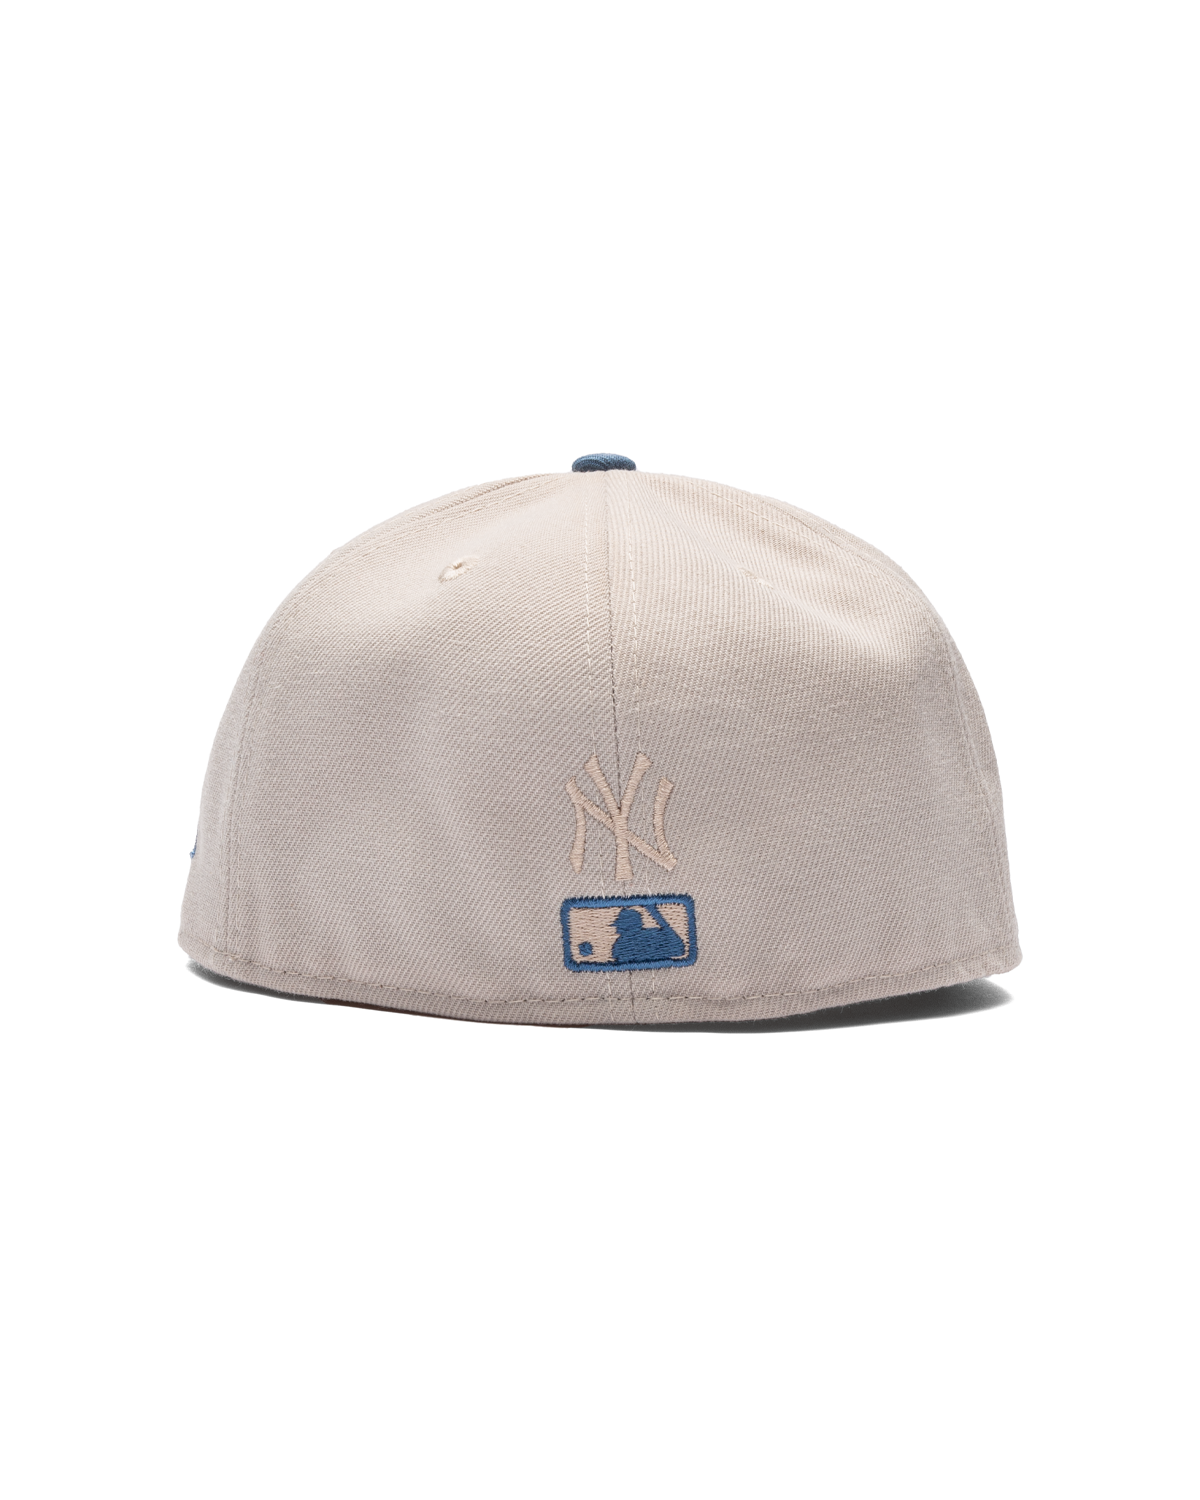 New York Yankees Color Brush Fitted Hat